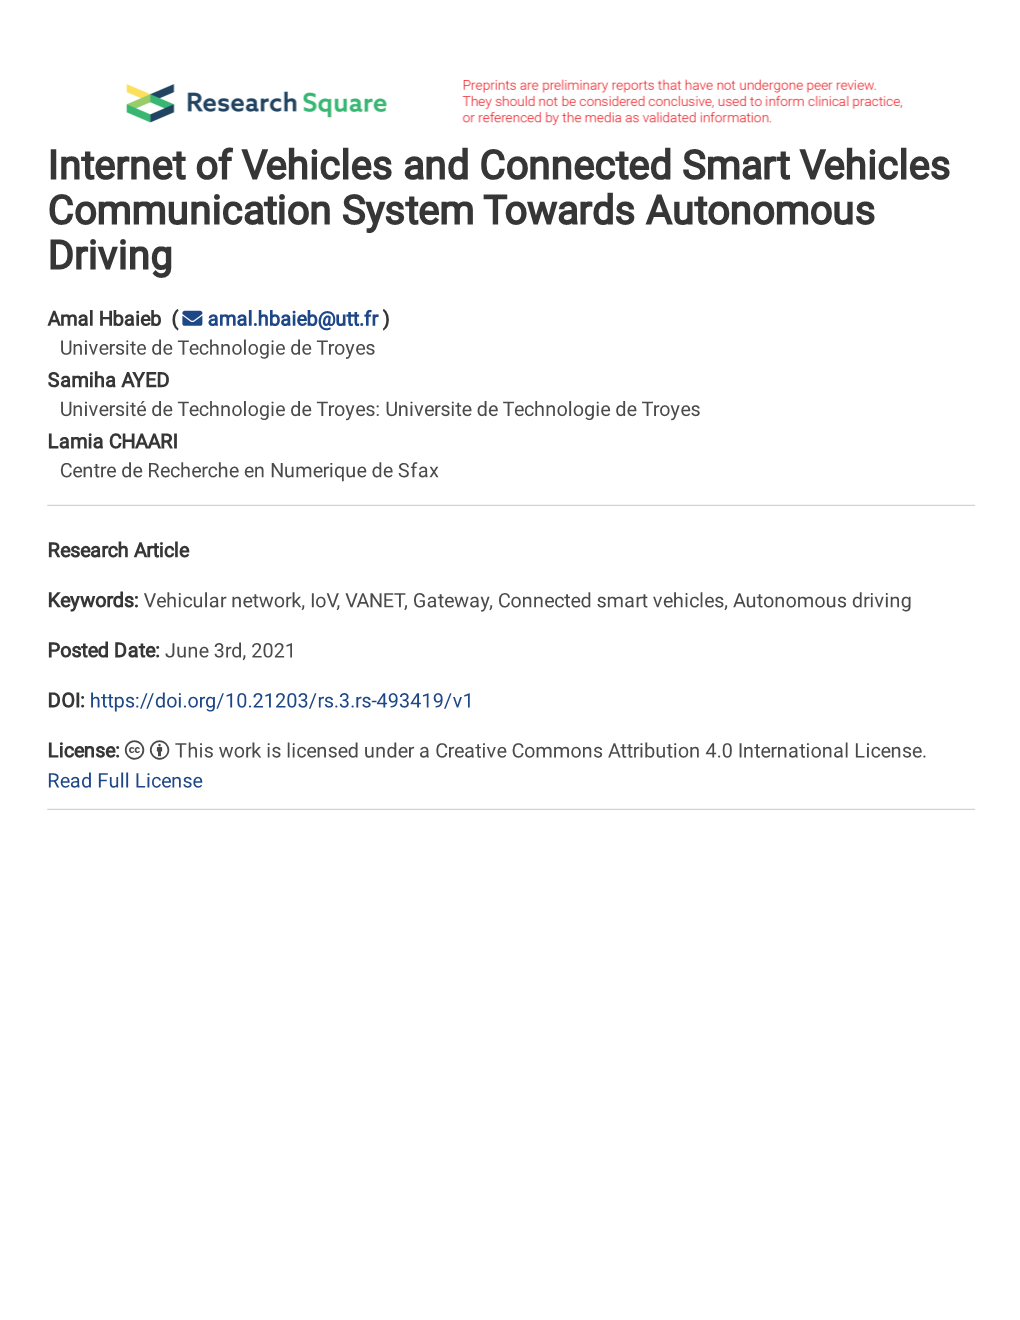 Internet of Vehicles and Connected Smart Vehicles Communication System Towards Autonomous Driving